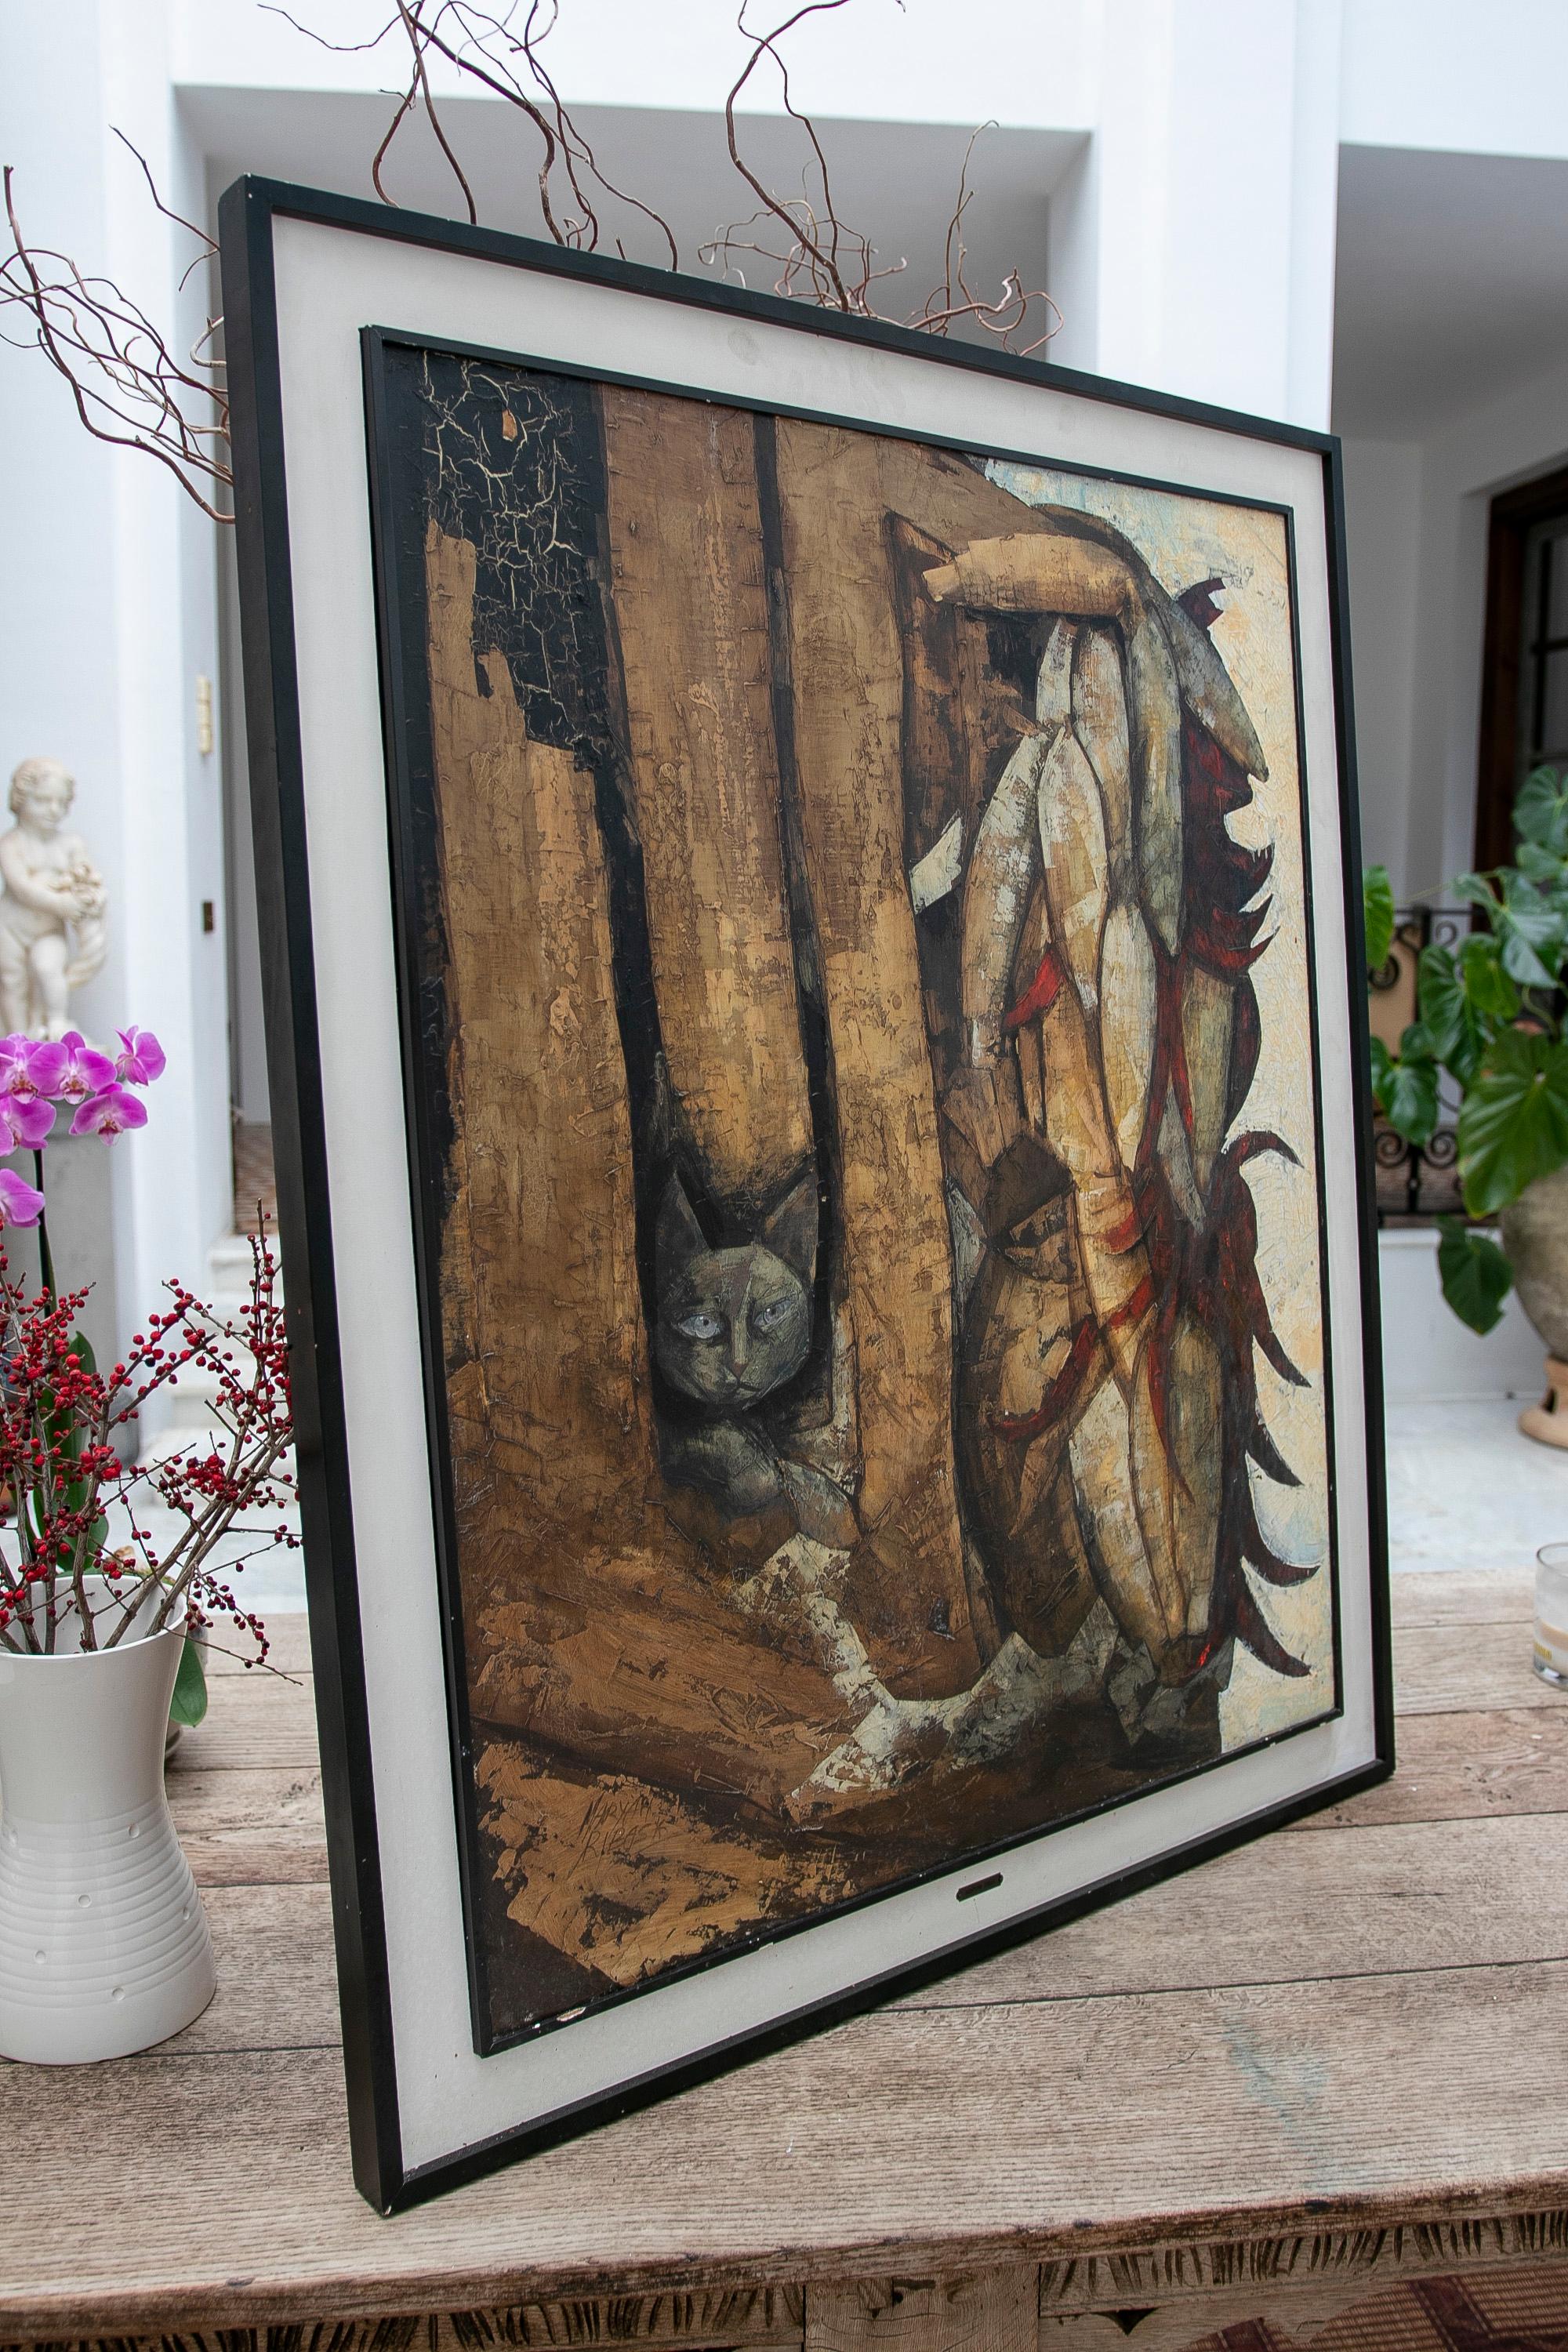 Picture painted by Maryan Ribas Sicilia born in 1925, with the theme of a cat among plants, signed.
Measurements with frame: 115x96x4cm